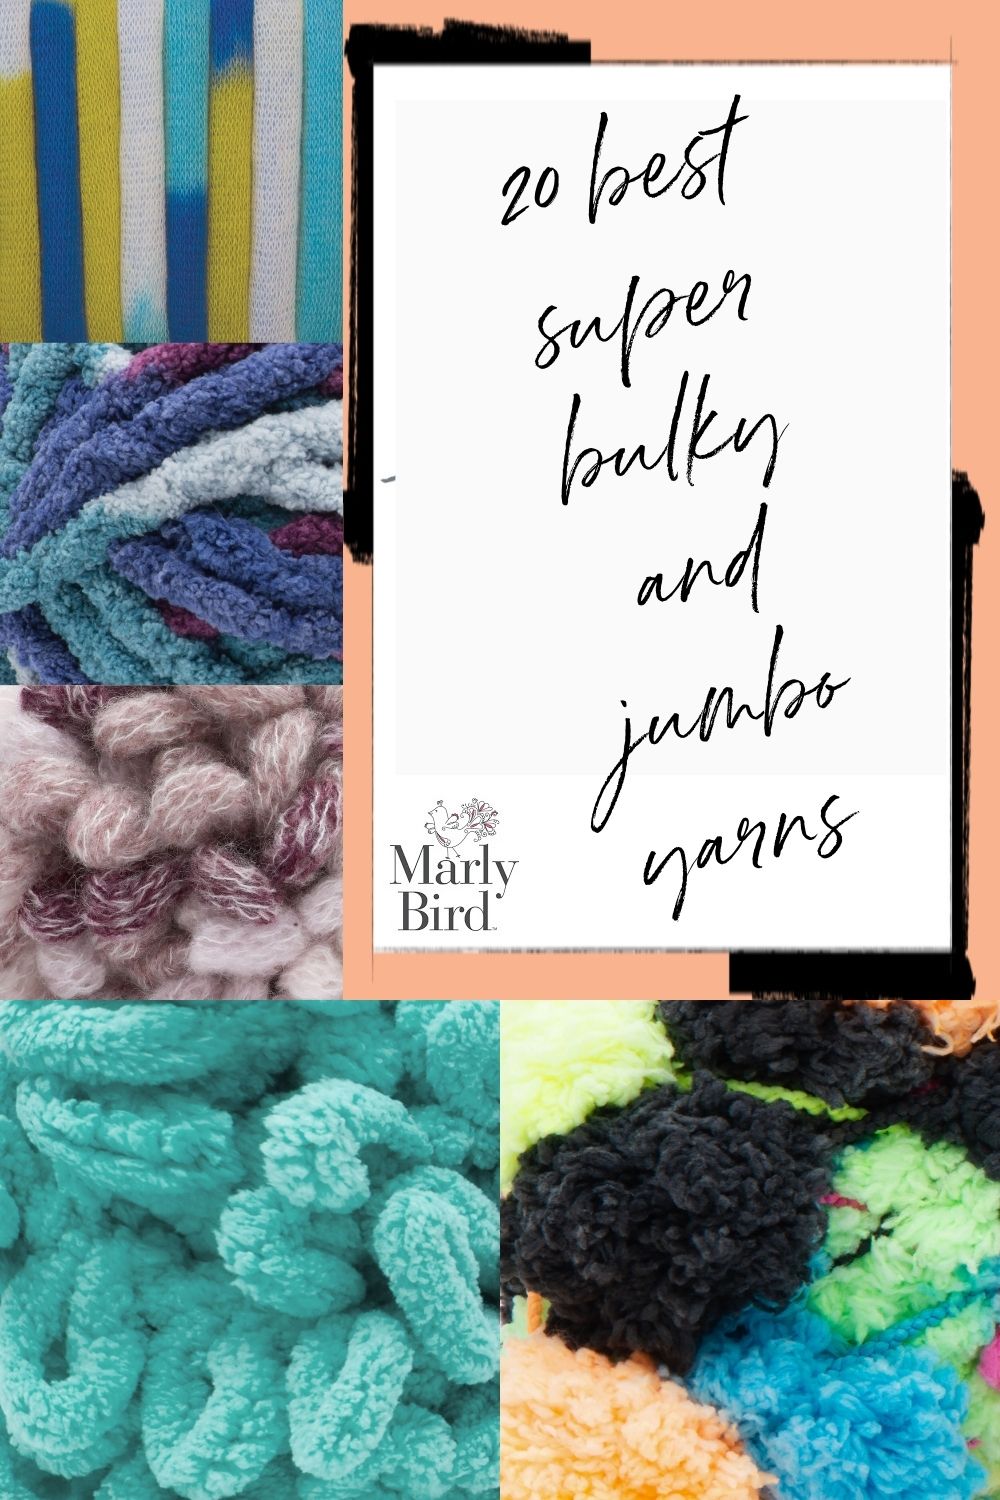 Get Thick With It: 20 Best Super Bulky and Jumbo Yarns - Marly Bird